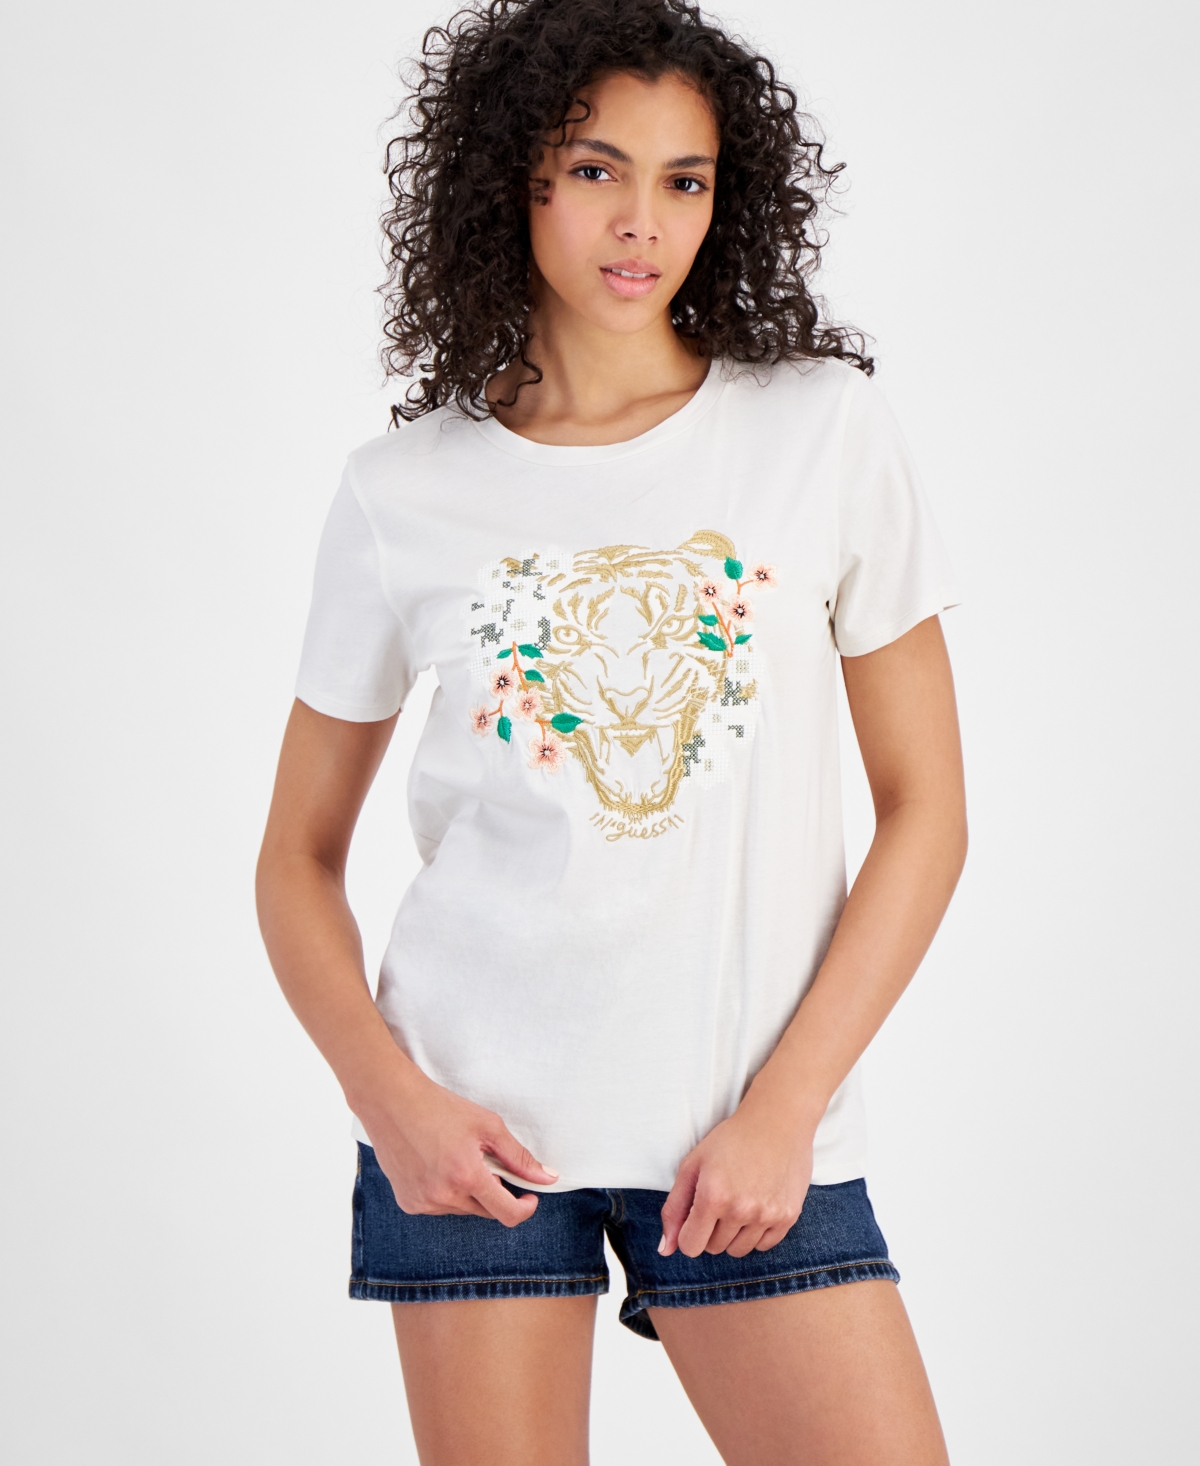 Women's Embroidered Tiger Daisy Short-Sleeve T-Shirt - CREAM WHITE